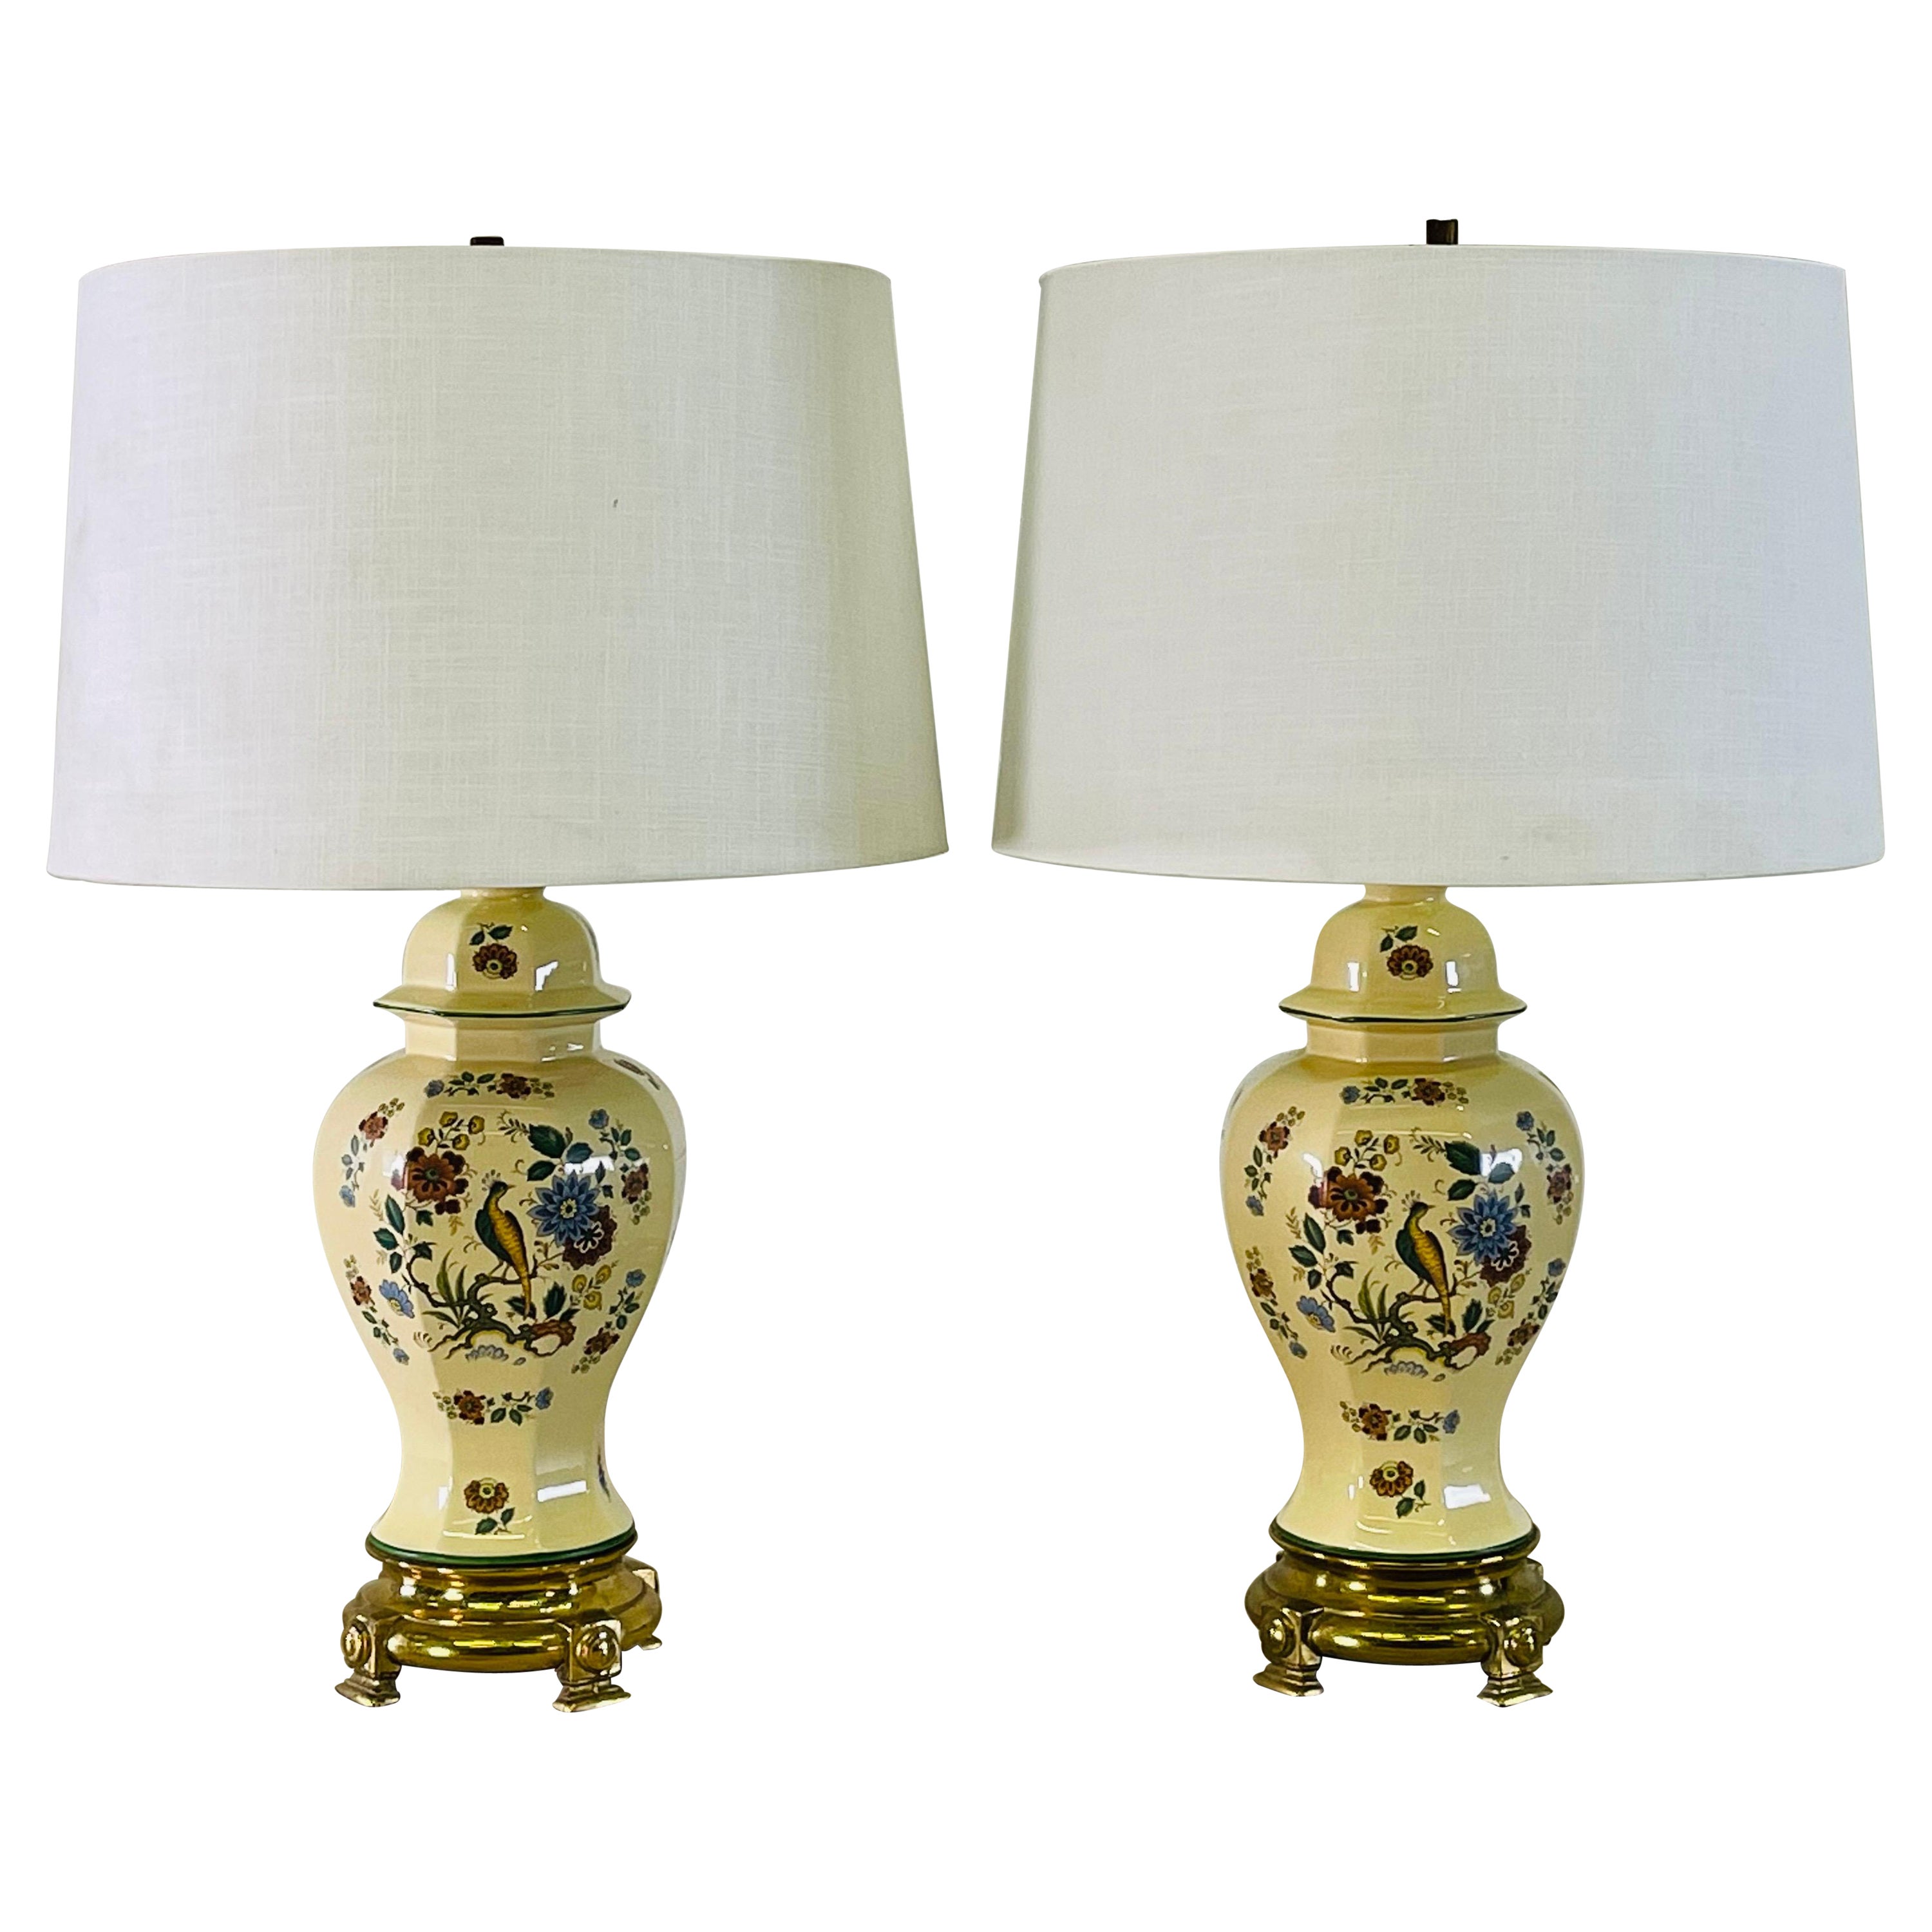 1970s Ceramic Urn Style Table Lamps by Nathan Lagin, Pair